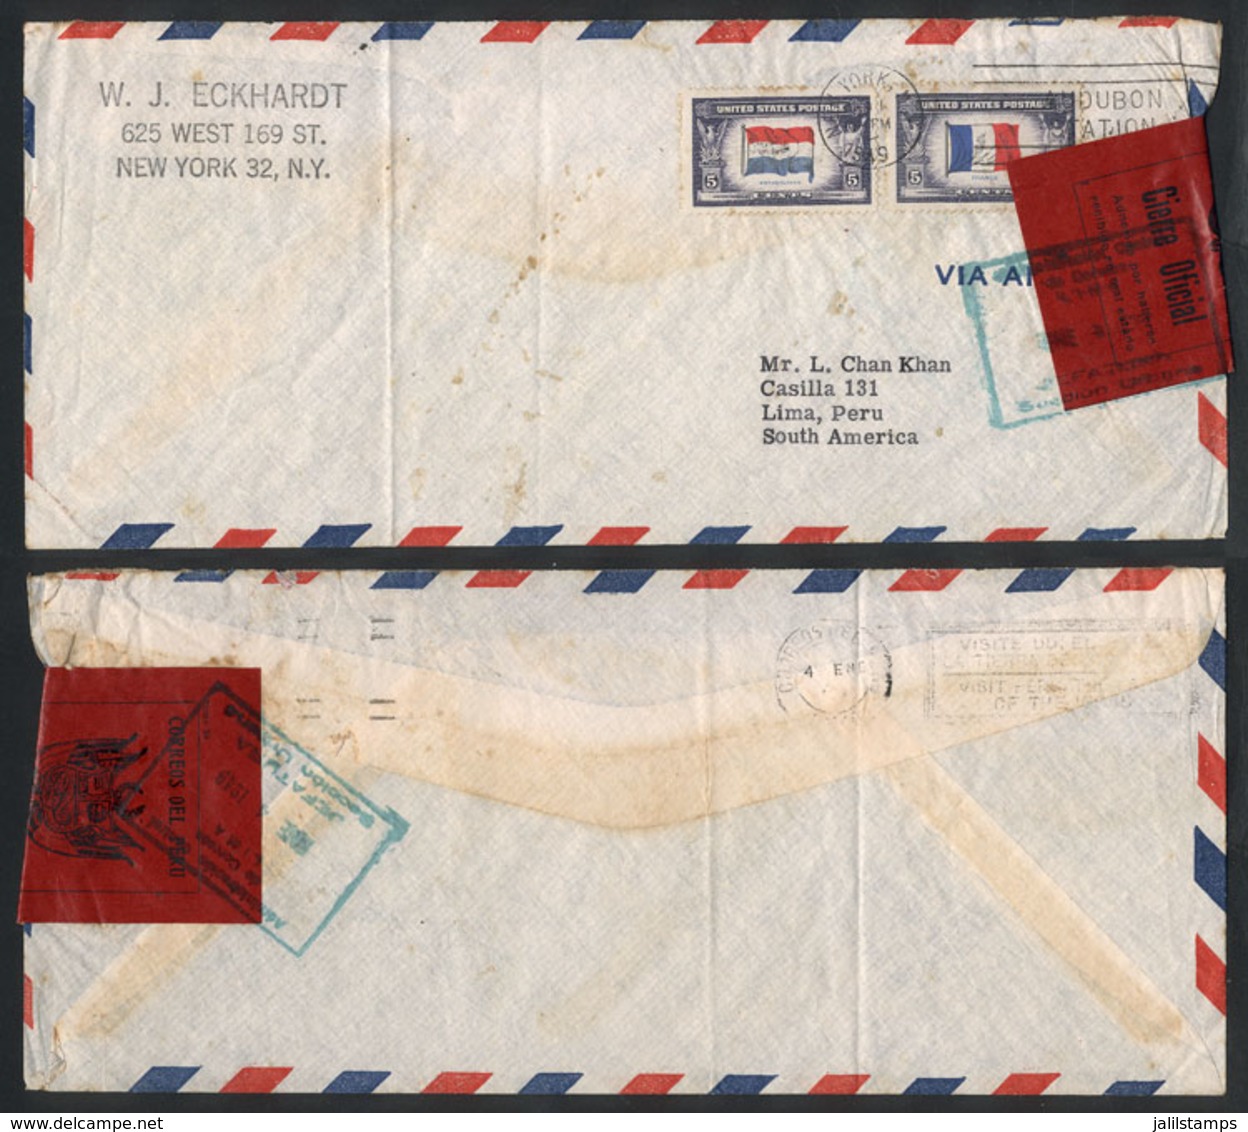 1687 PERU: Airmail Cover Sent From USA To Lima In 1949, At Right It Bears An Official Seal, Very Nice! - Peru